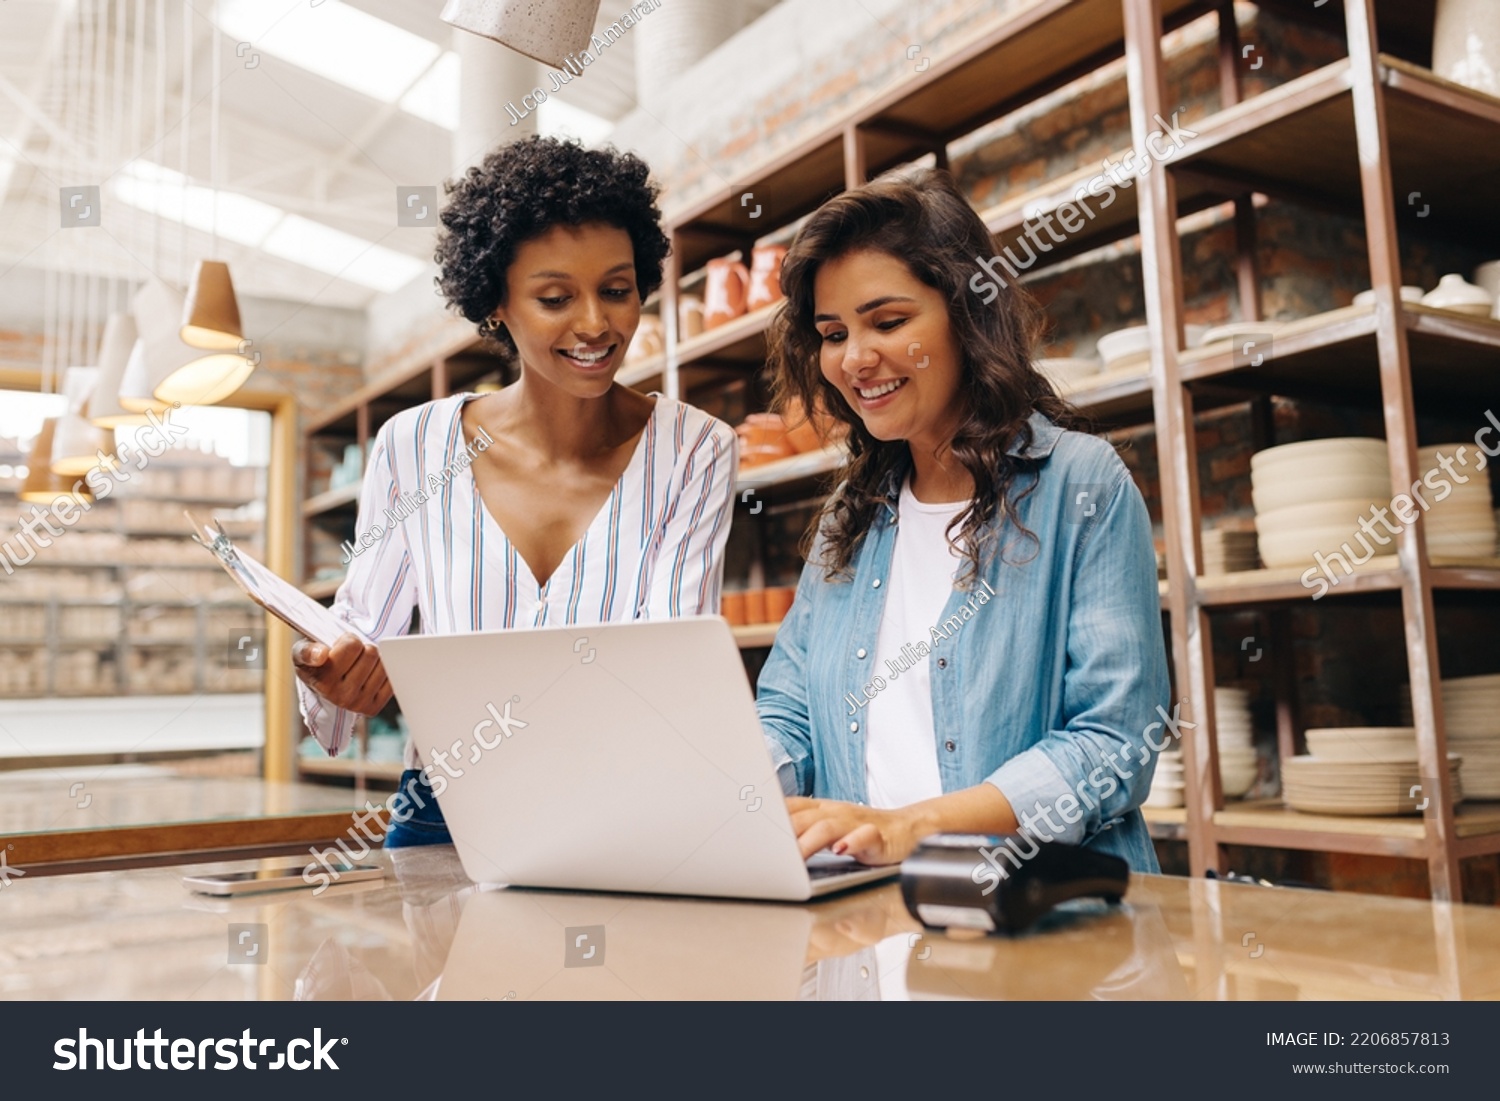 Happy young ceramists using a laptop while working in their store. Female entrepreneurs managing online orders on their website.Cheerful young businesswomen running a creative small business together. #2206857813